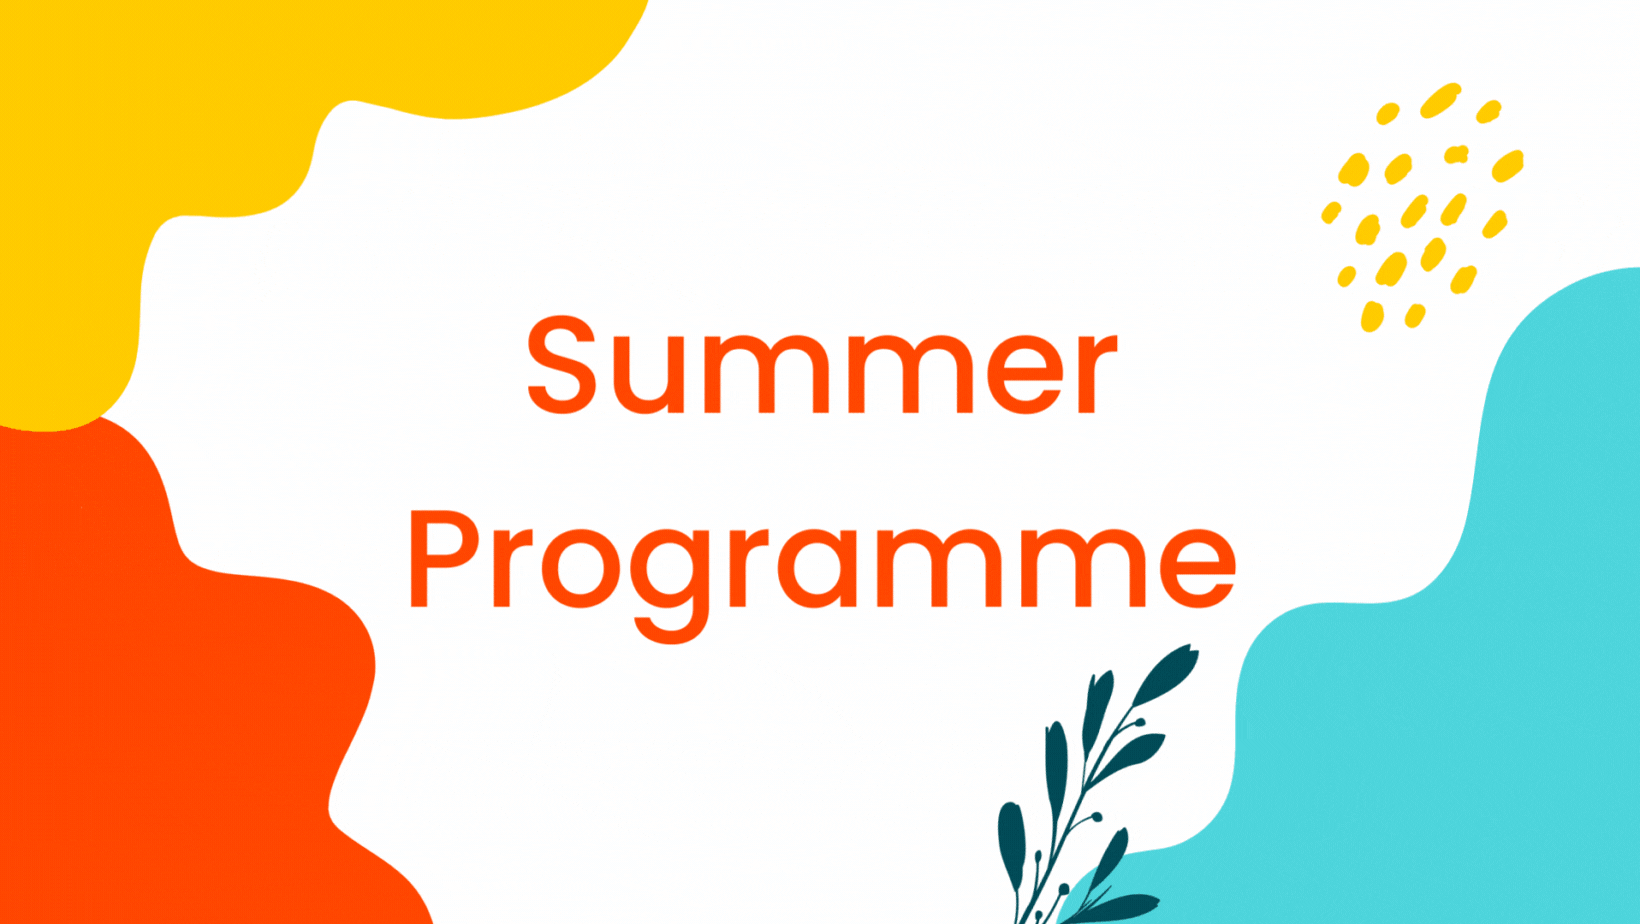 Colourful graphic with text that reads "Summer programme"